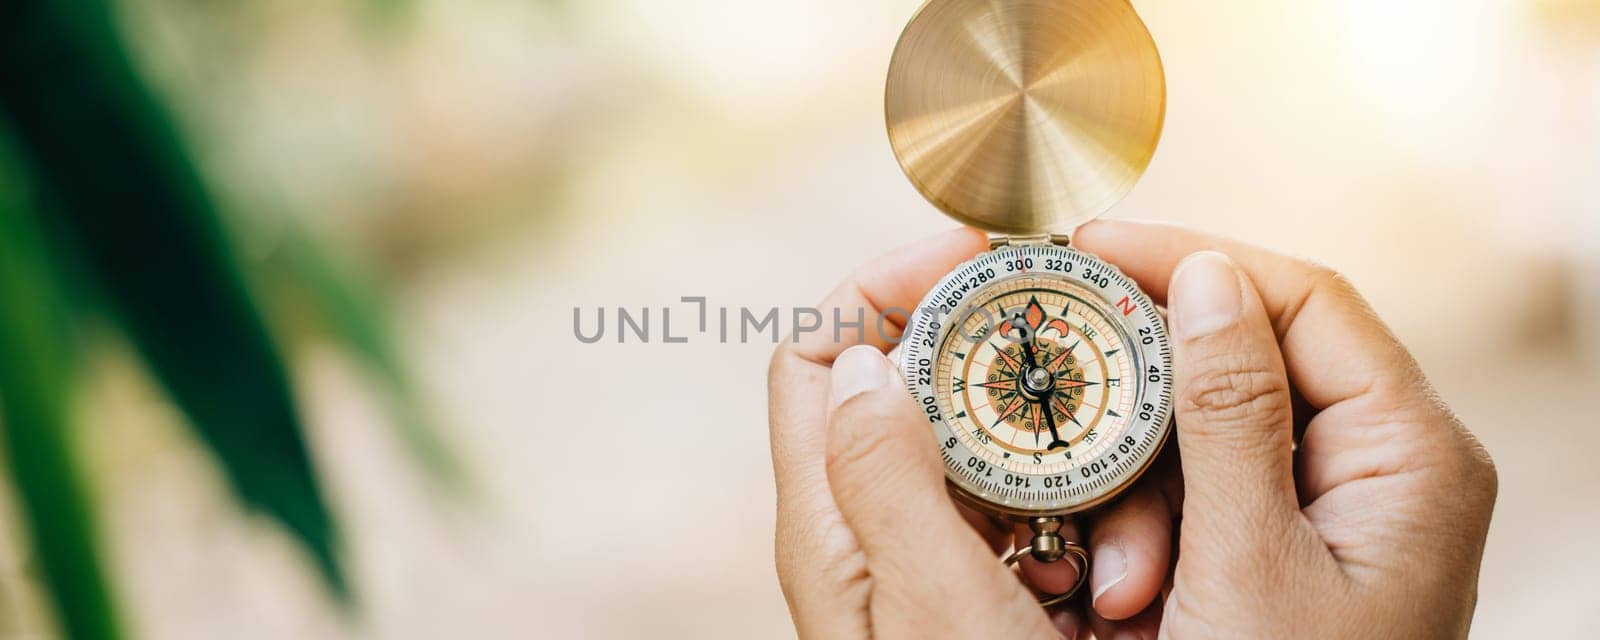 In a close-up shot a woman uses a compass in the forest. Her hand holds the compass representing guidance and exploration.